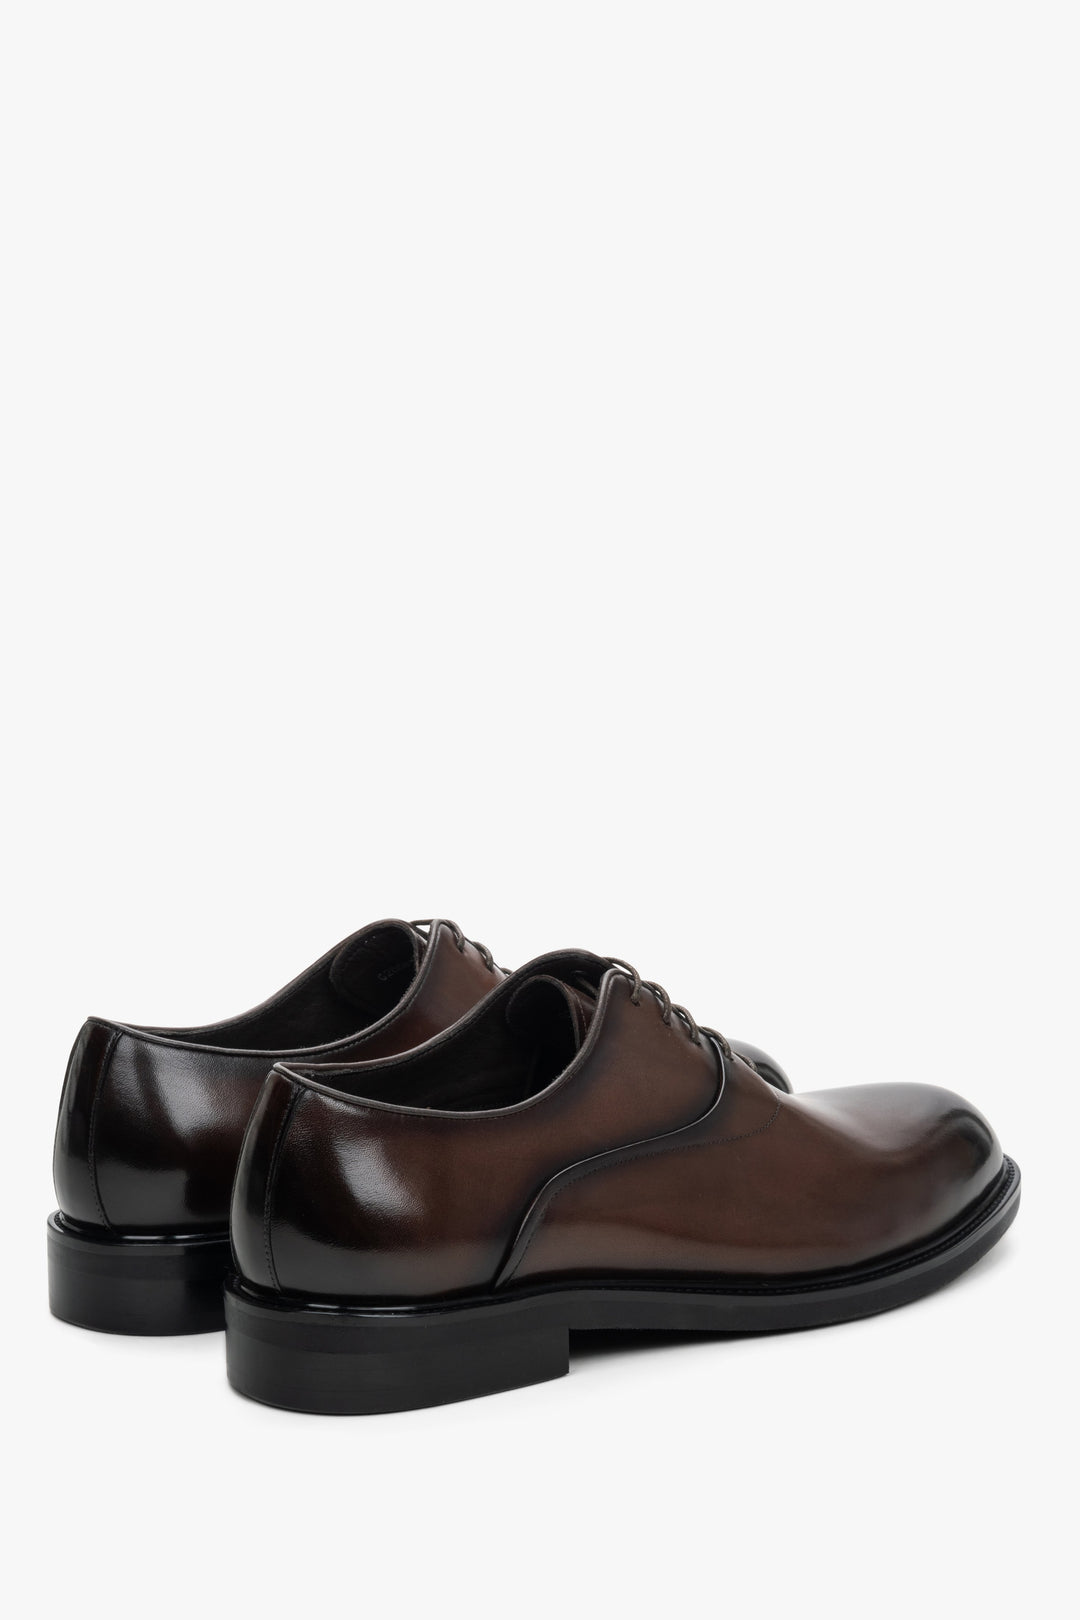 Men's brown leather Oxford shoes by Estro - close-up on the side line and heel counter.